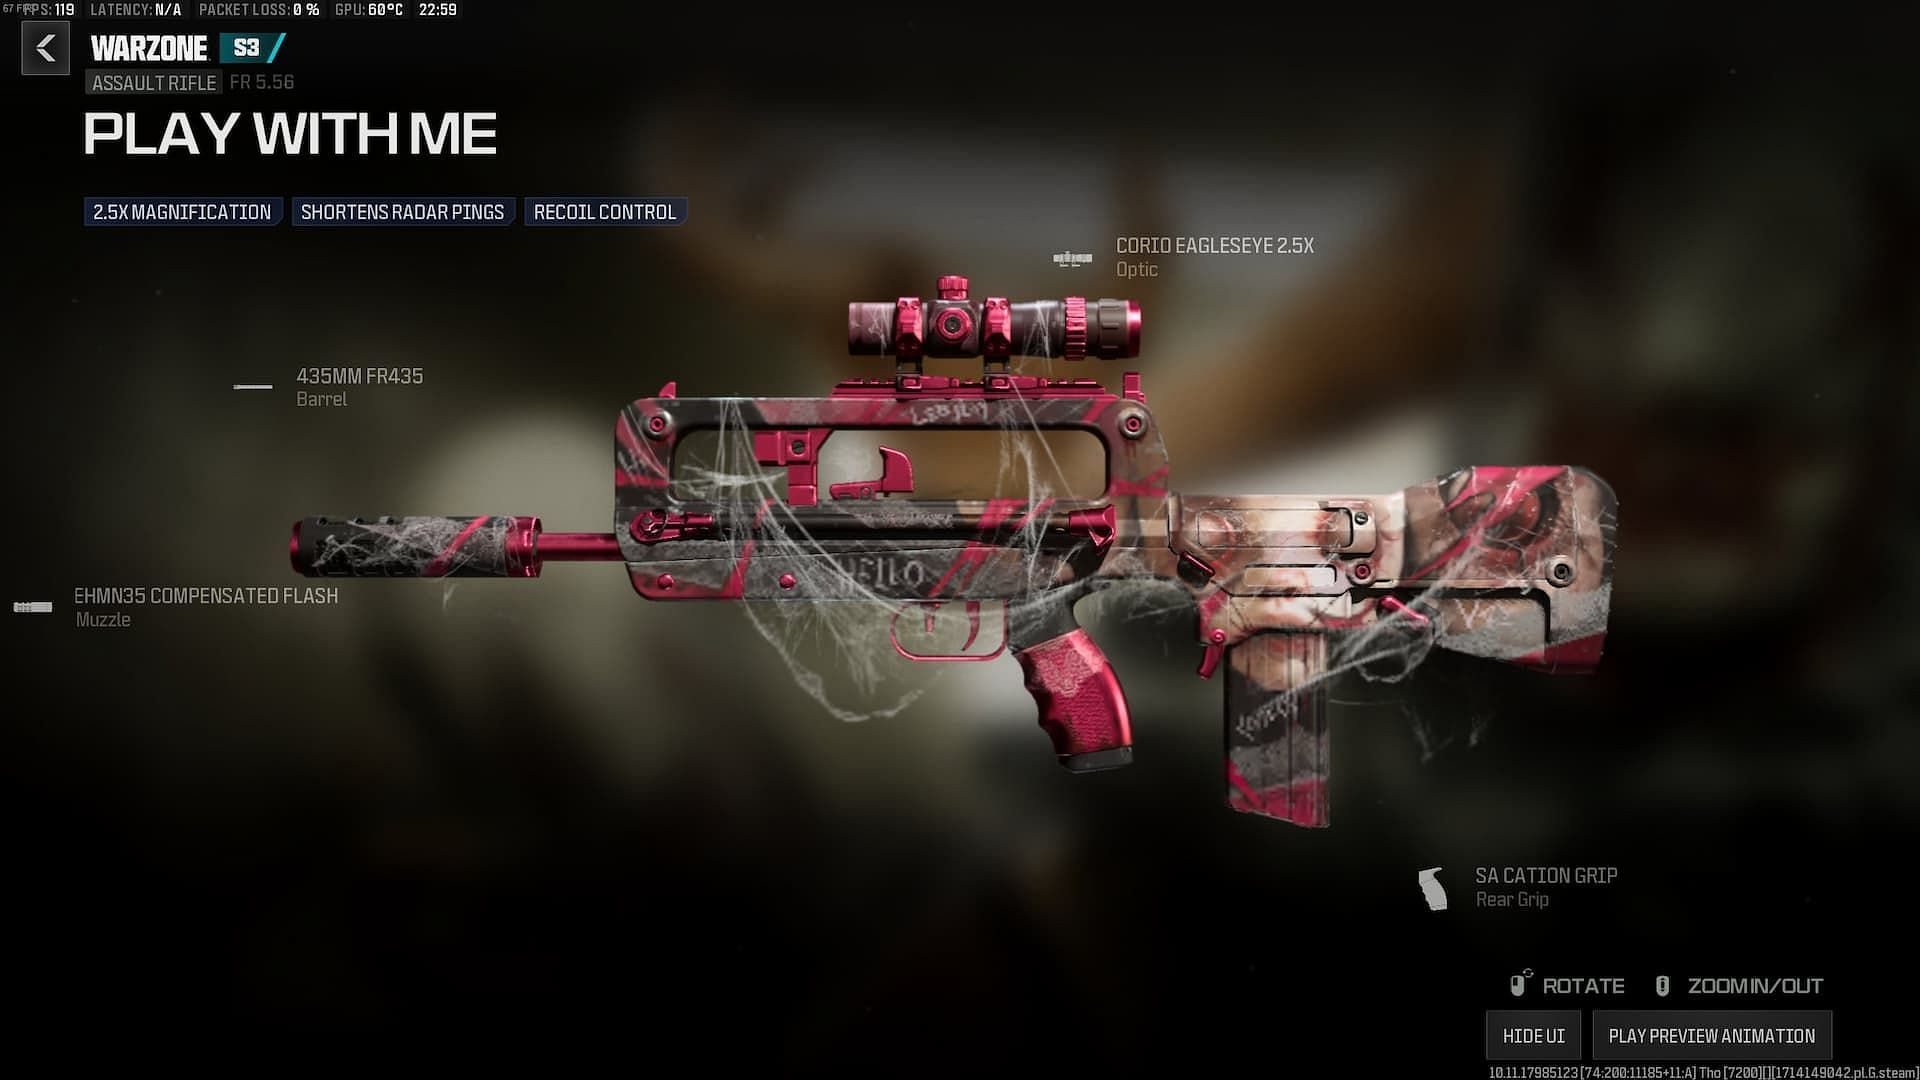 Play With Me weapon blueprint for FR 5.56 (Image via Activision)